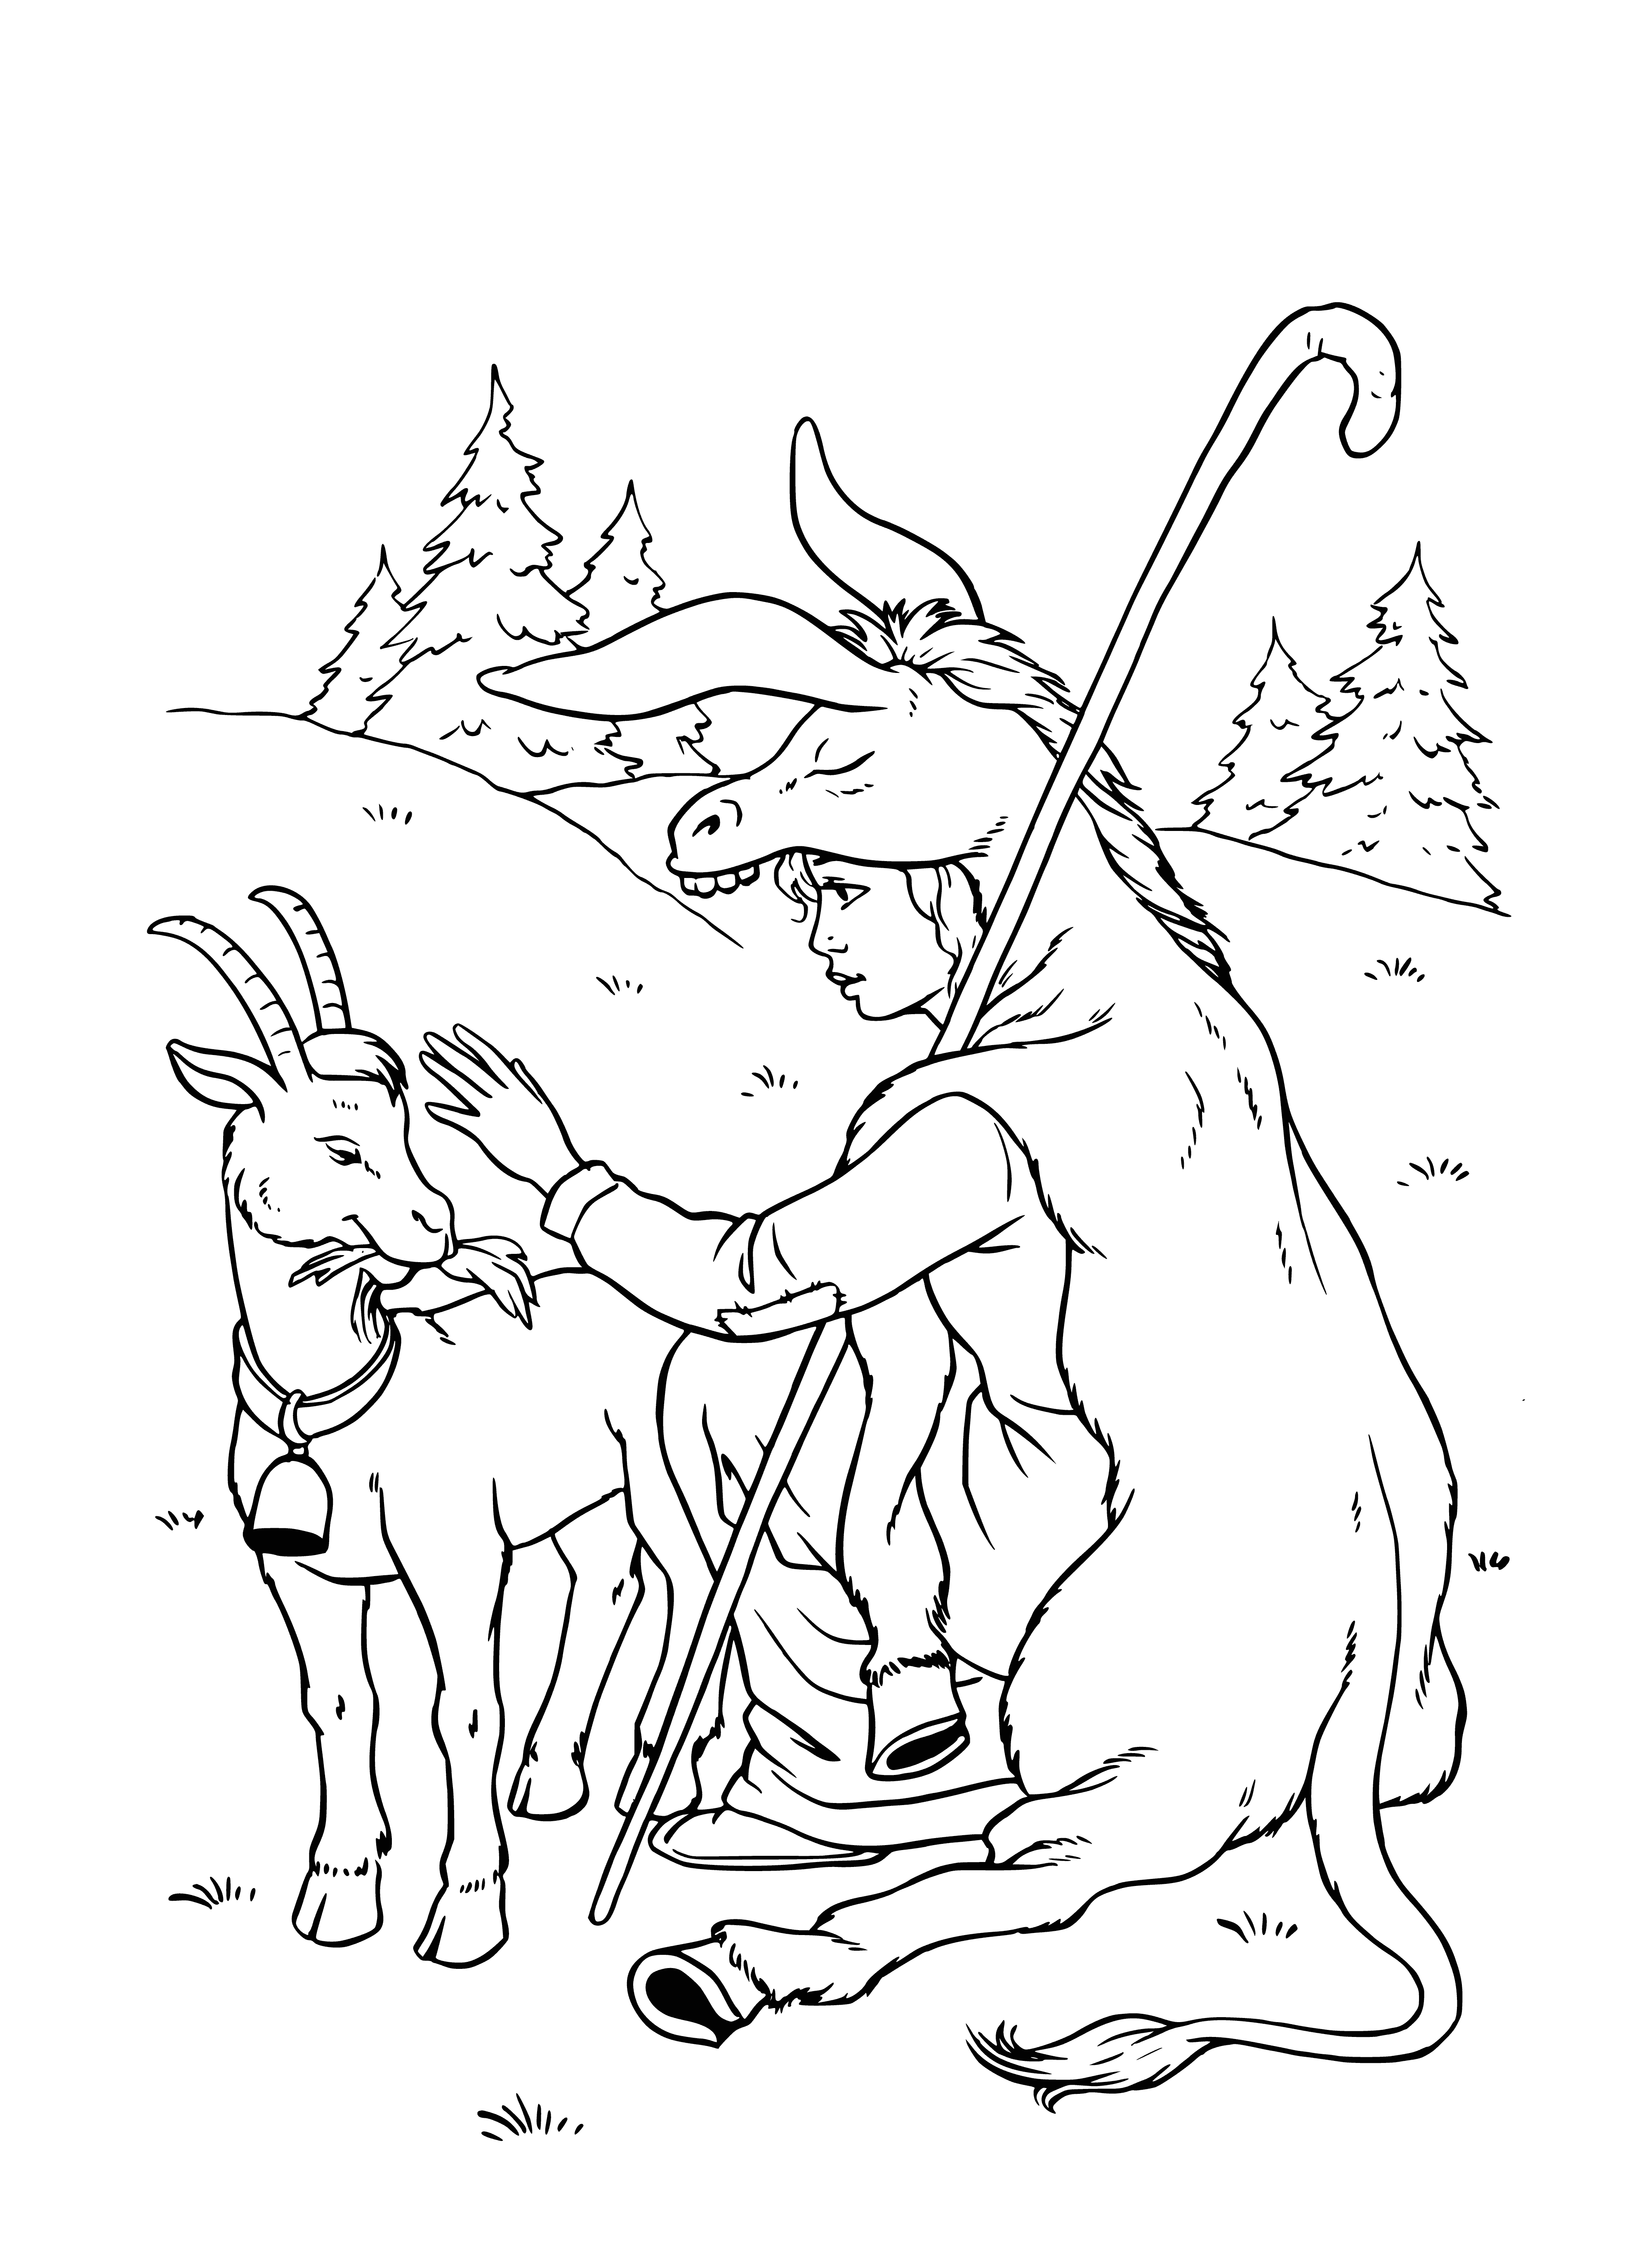 coloring page: A proud donkey with a dazzling golden coat stands in a fragrant field of flowers.